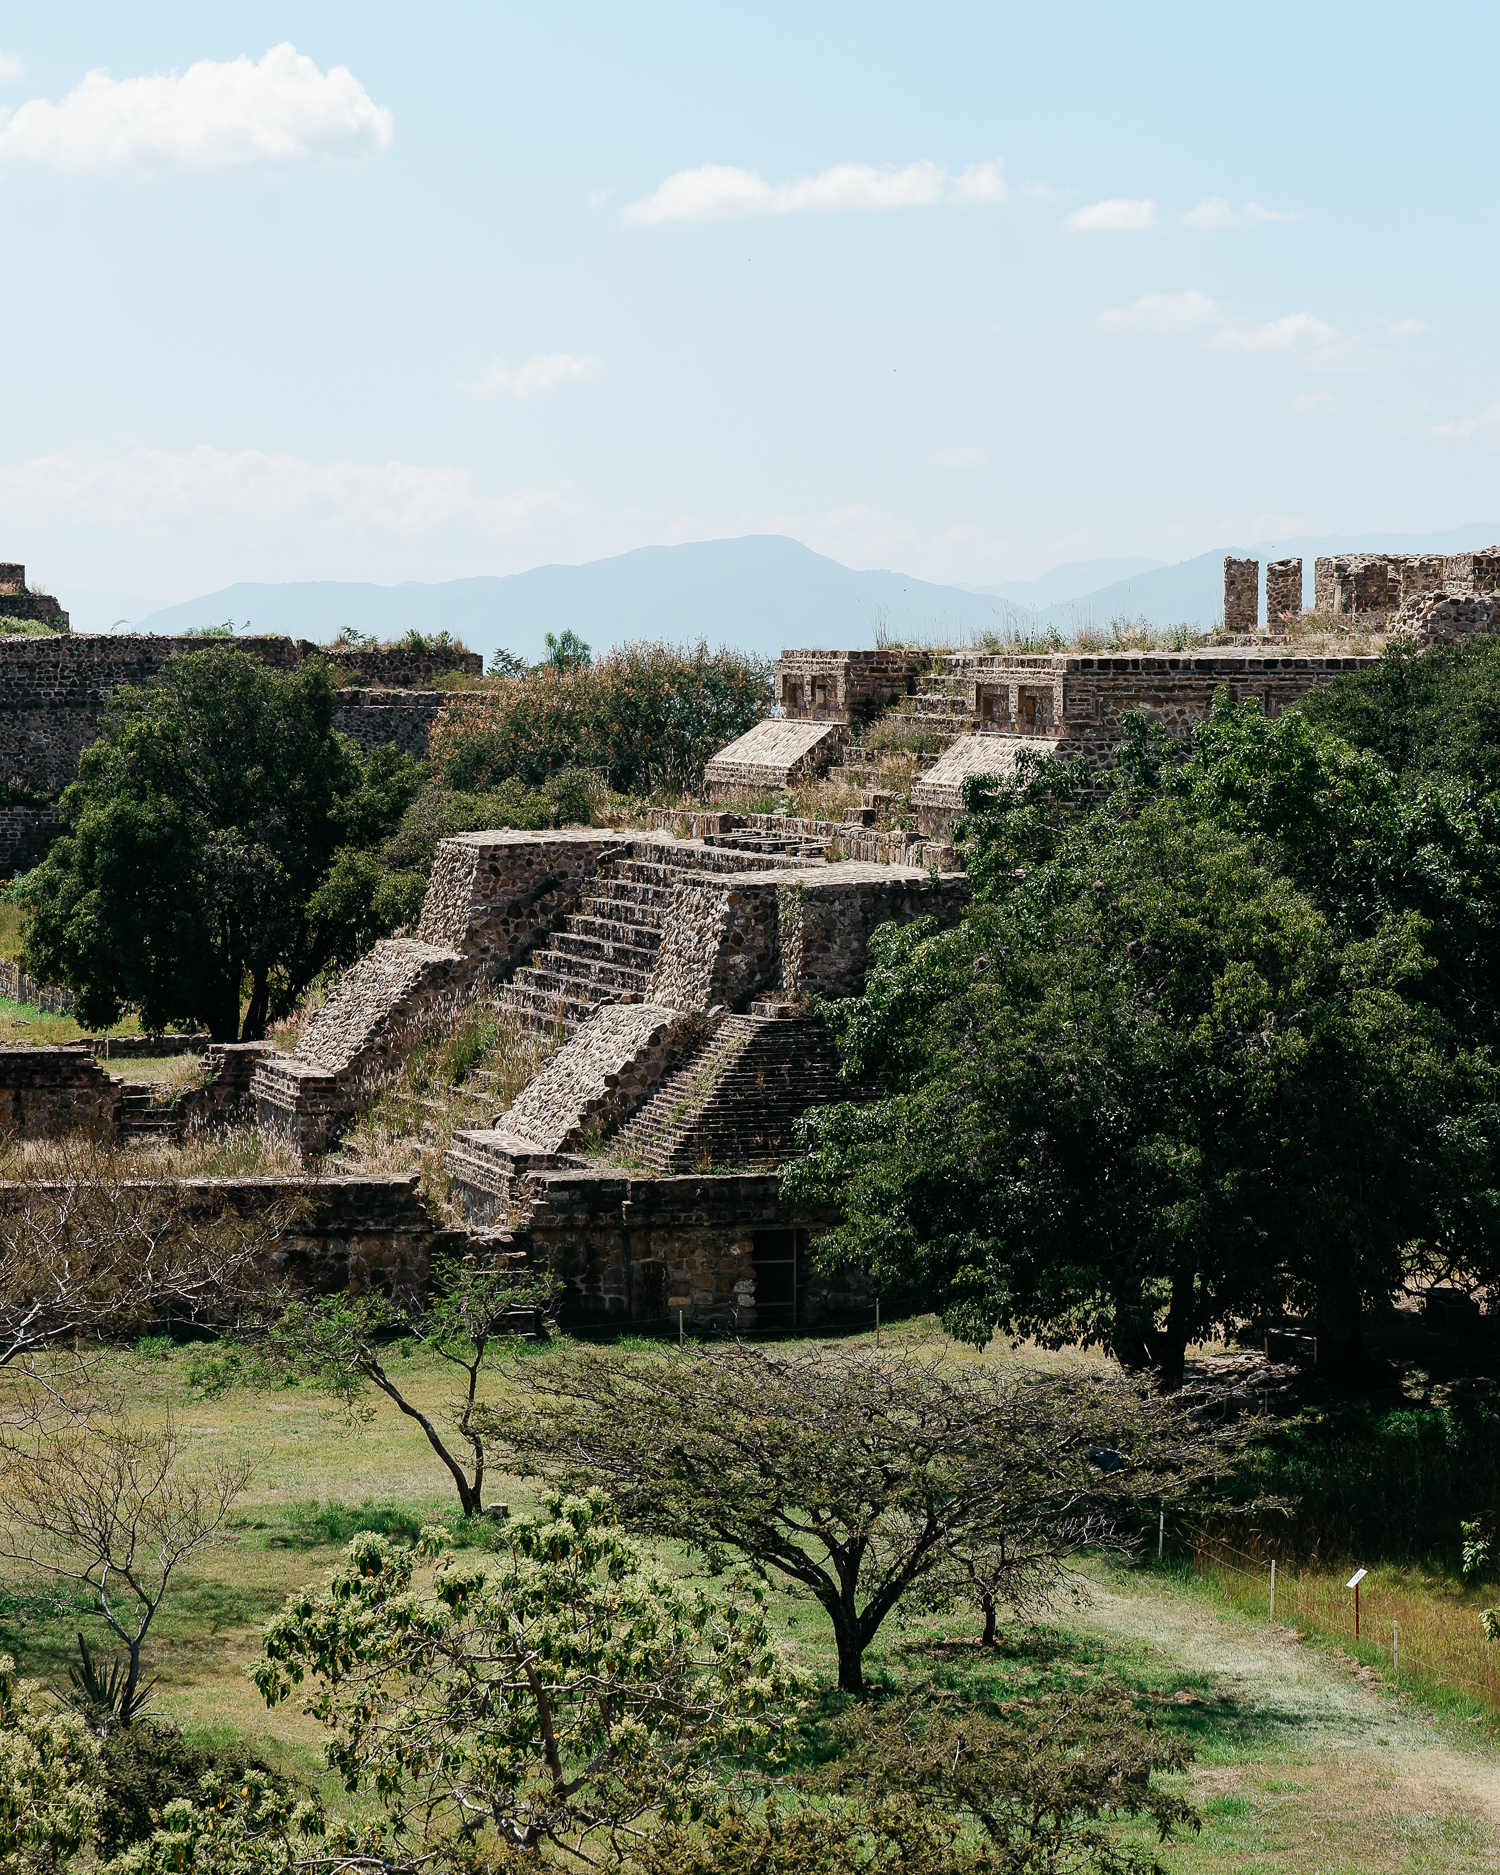 Explore the archaeological site of Monte Alban